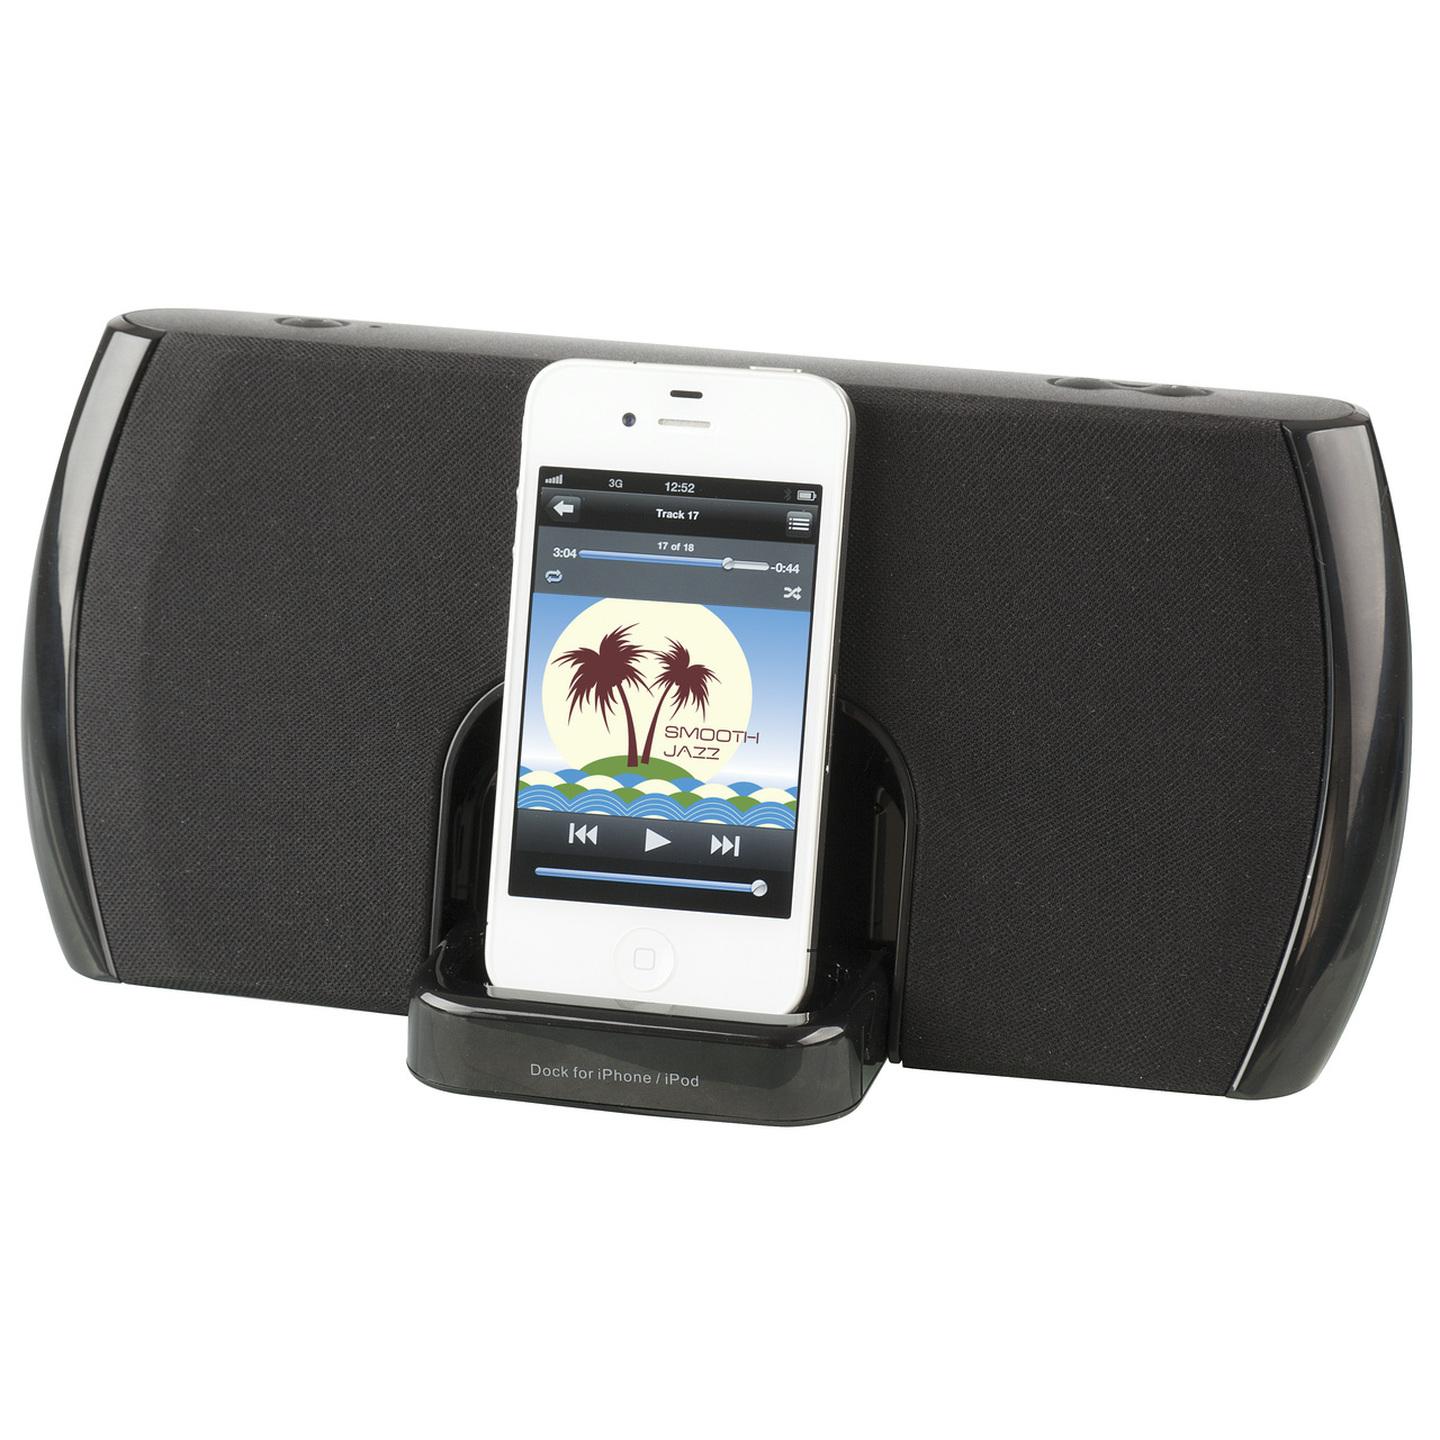 Portable Stereo Speakers/Charger with Docking Station for iPhone/iPod